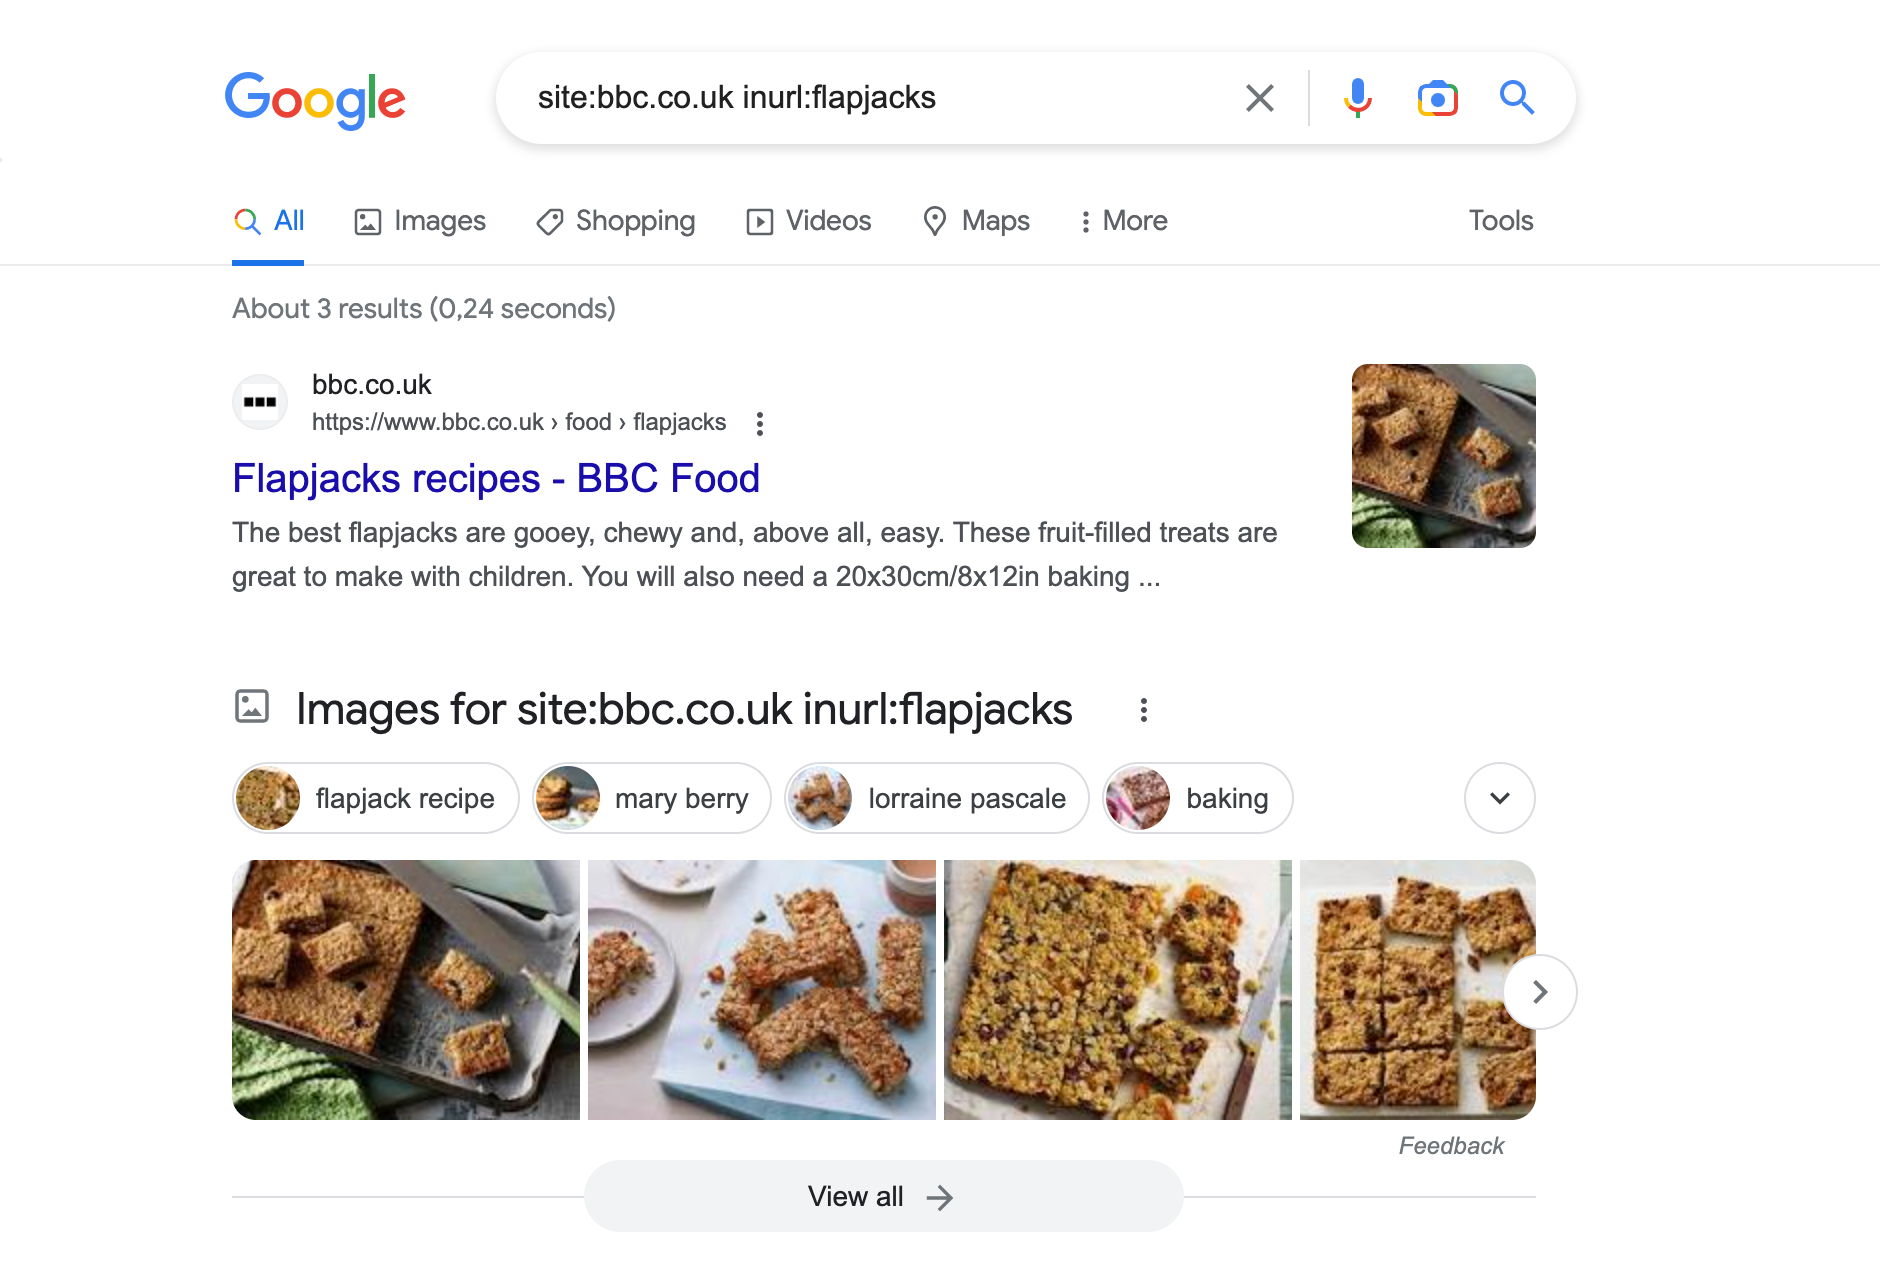 Google search result for the query site:bbc.co.uk inurl:flapjacks, About 3 results are displayed.